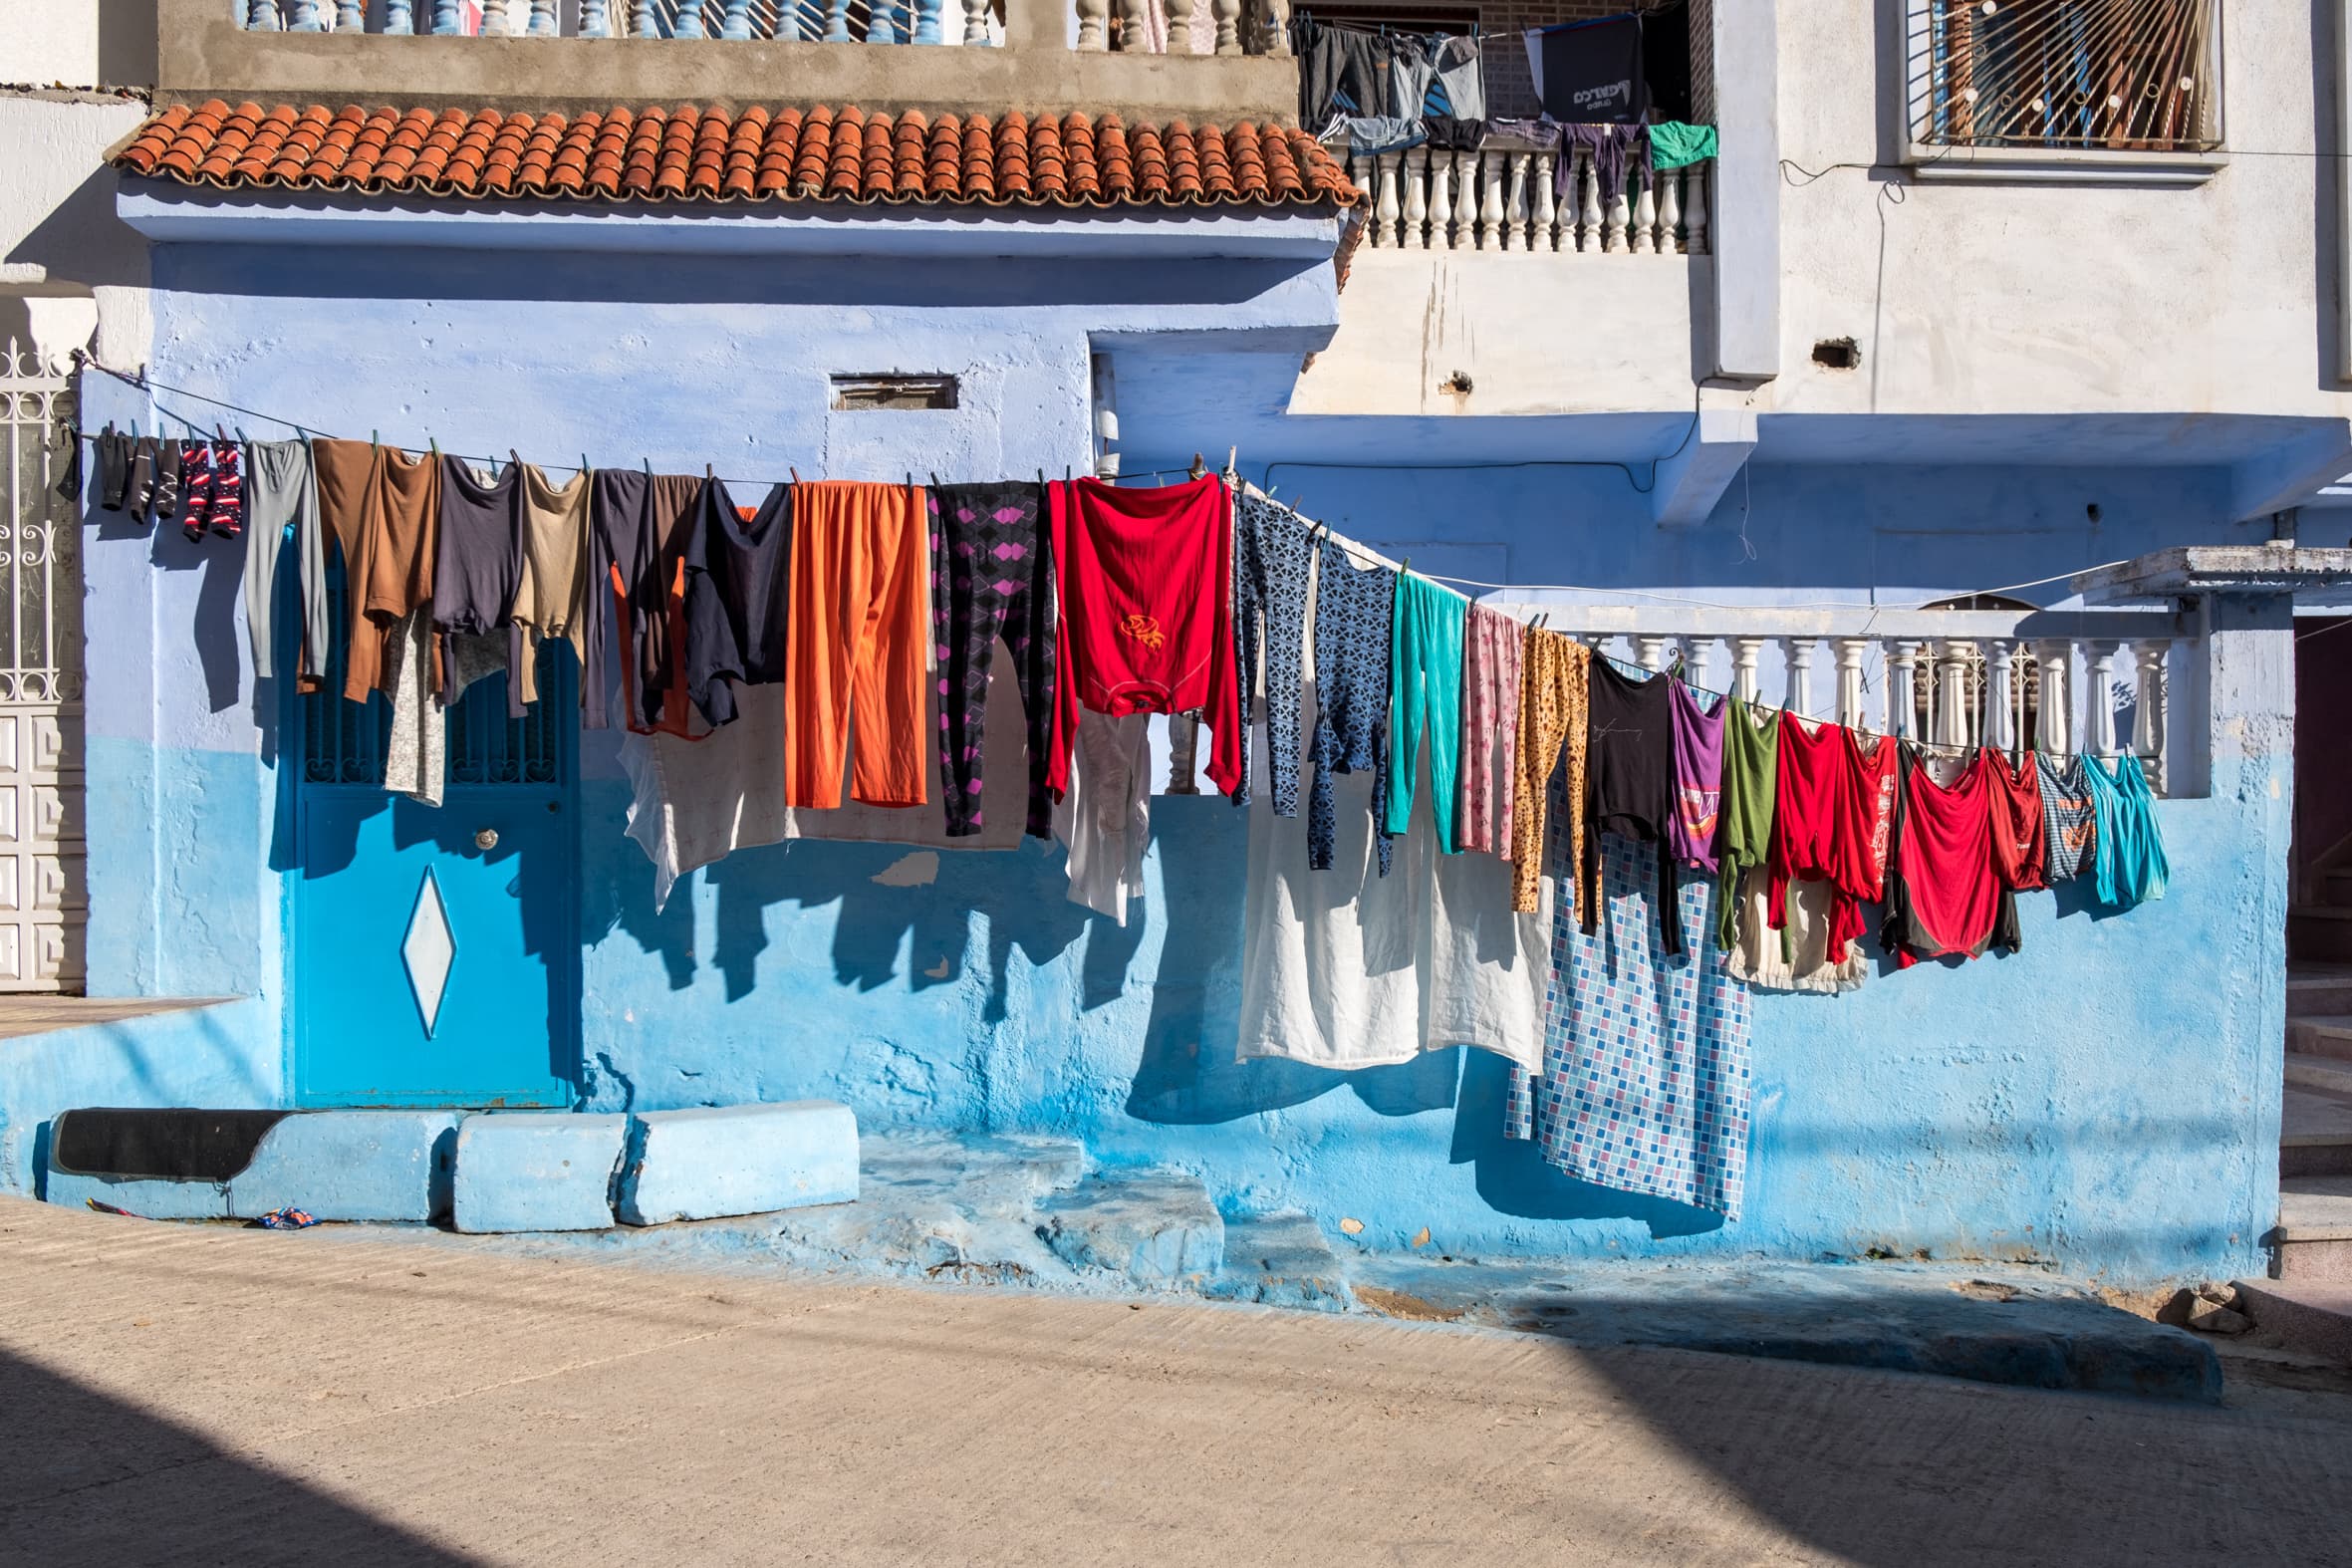 Clothes washing drying on a blue house, Chefchaouen, Morocco